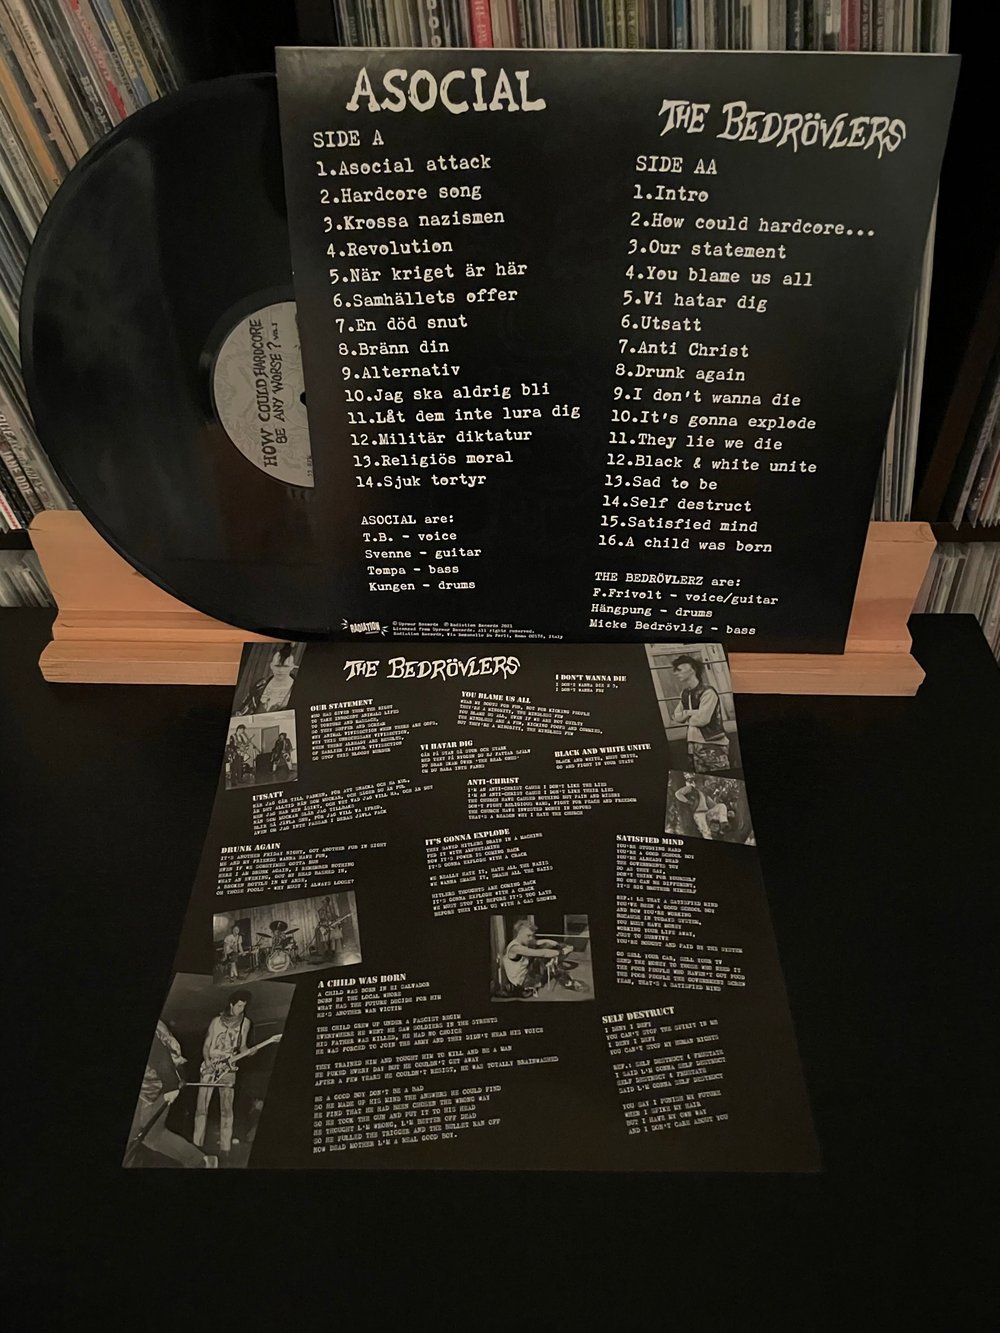 ASOCIAL / THE BEDROVLERS "How Could Hardcore Be Any Worse? Vol 1" LP